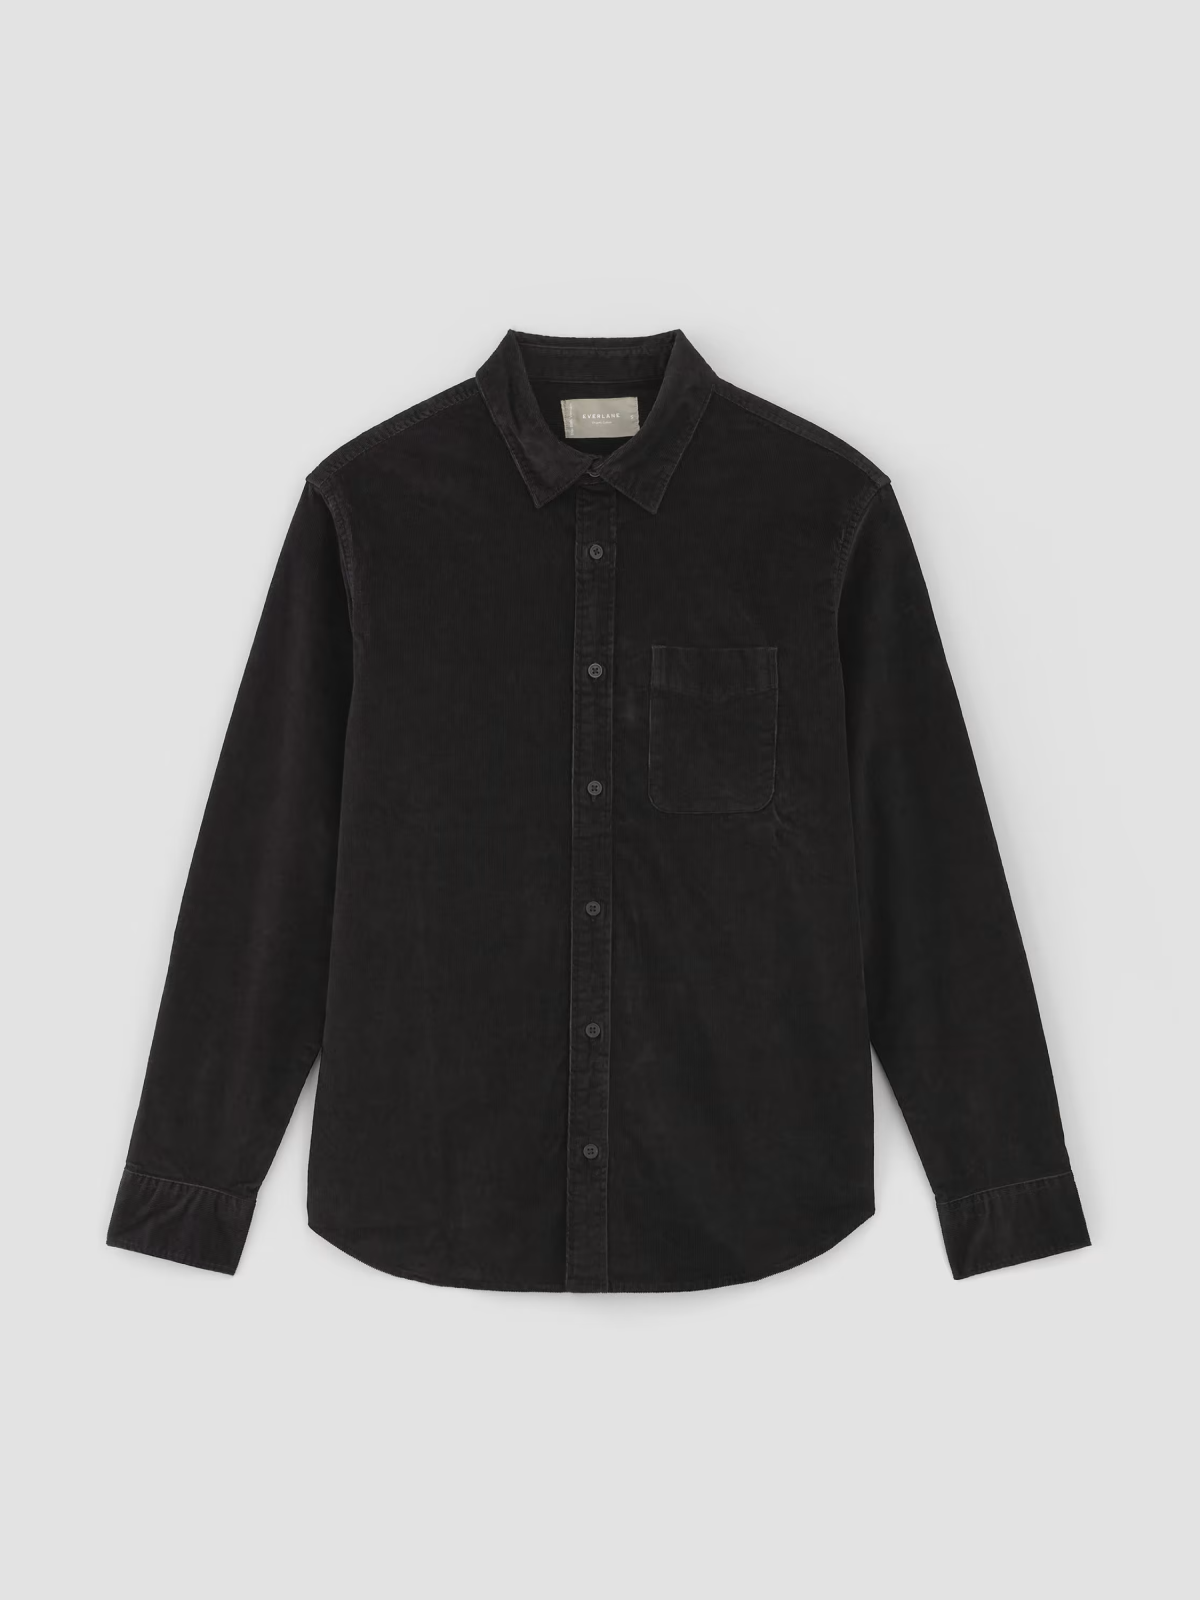 The Relaxed Corduroy Shirt